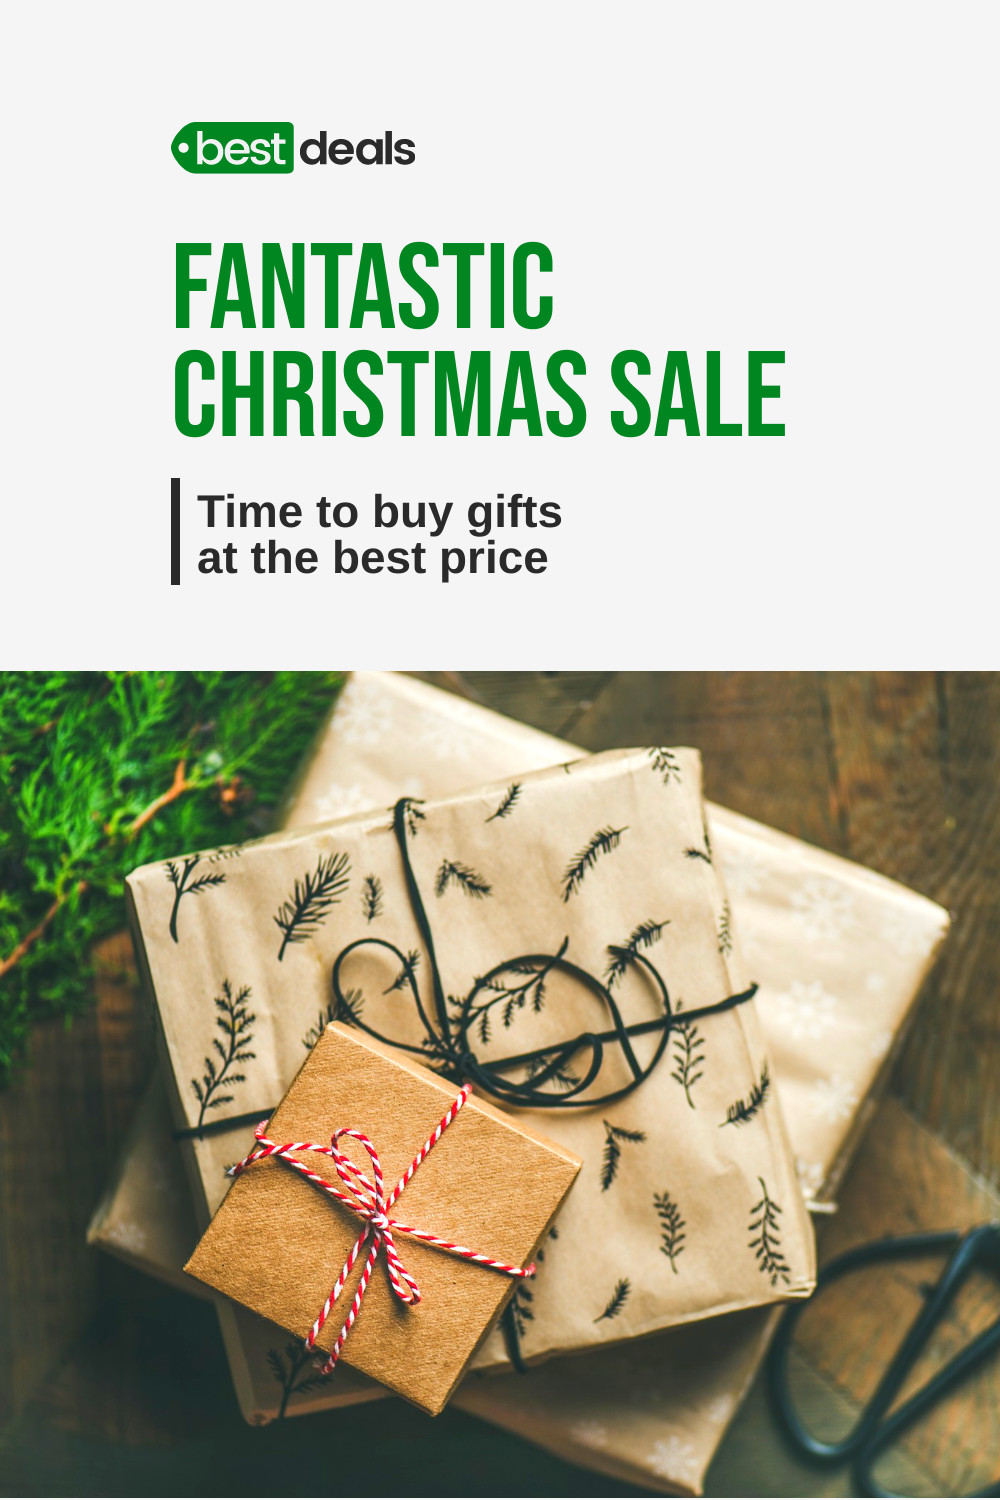 Fantastic Christmas Sale to Buy Gifts Inline Rectangle 300x250